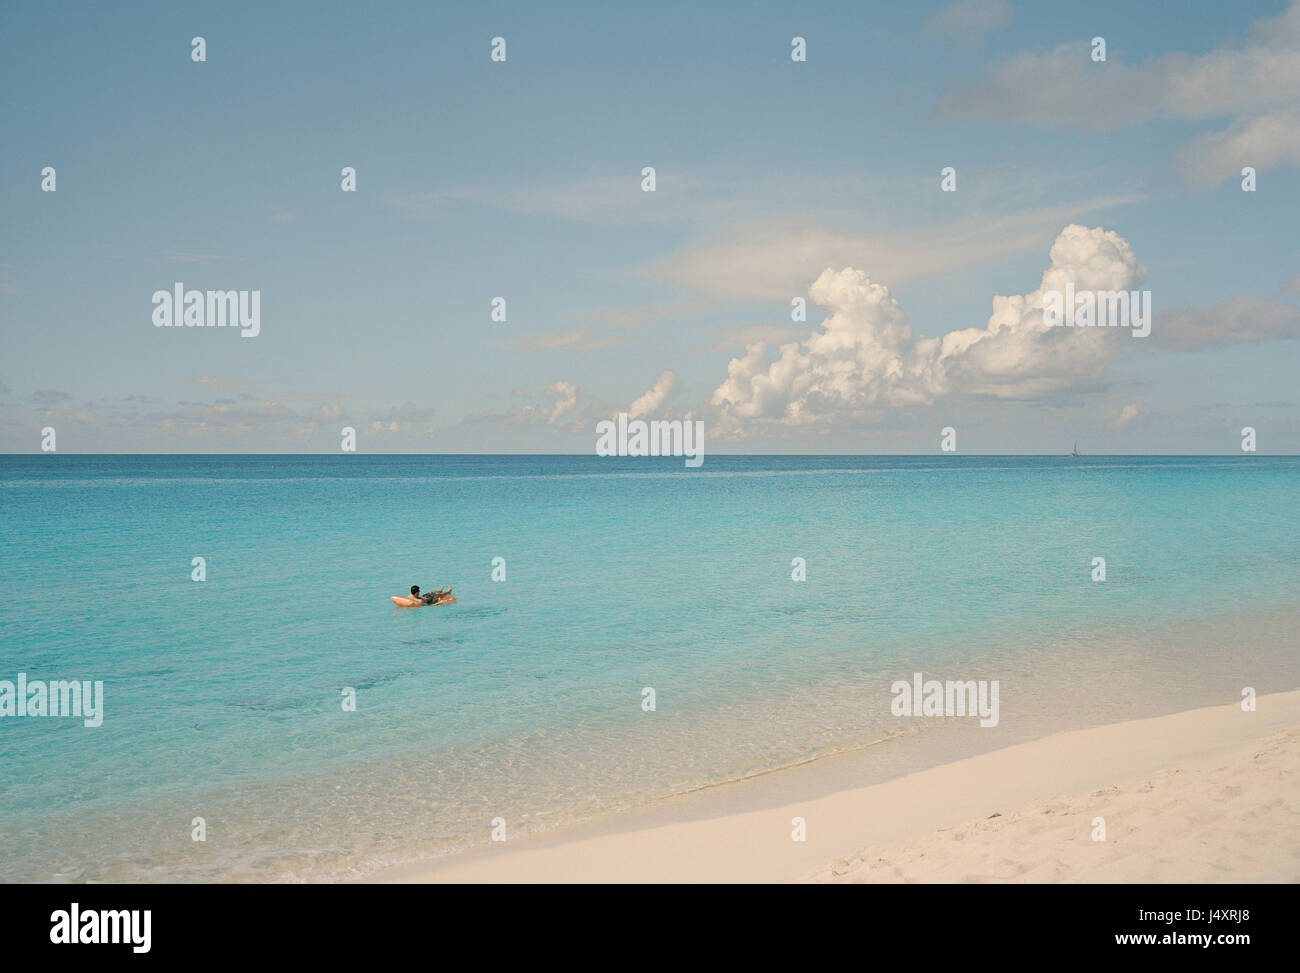 A lone bather on an inflatable bed floats in the azur waters off a beach in Saint Martin, an island in the Caribbean sea.  Derek Hudson / Alamy Stock  Stock Photo